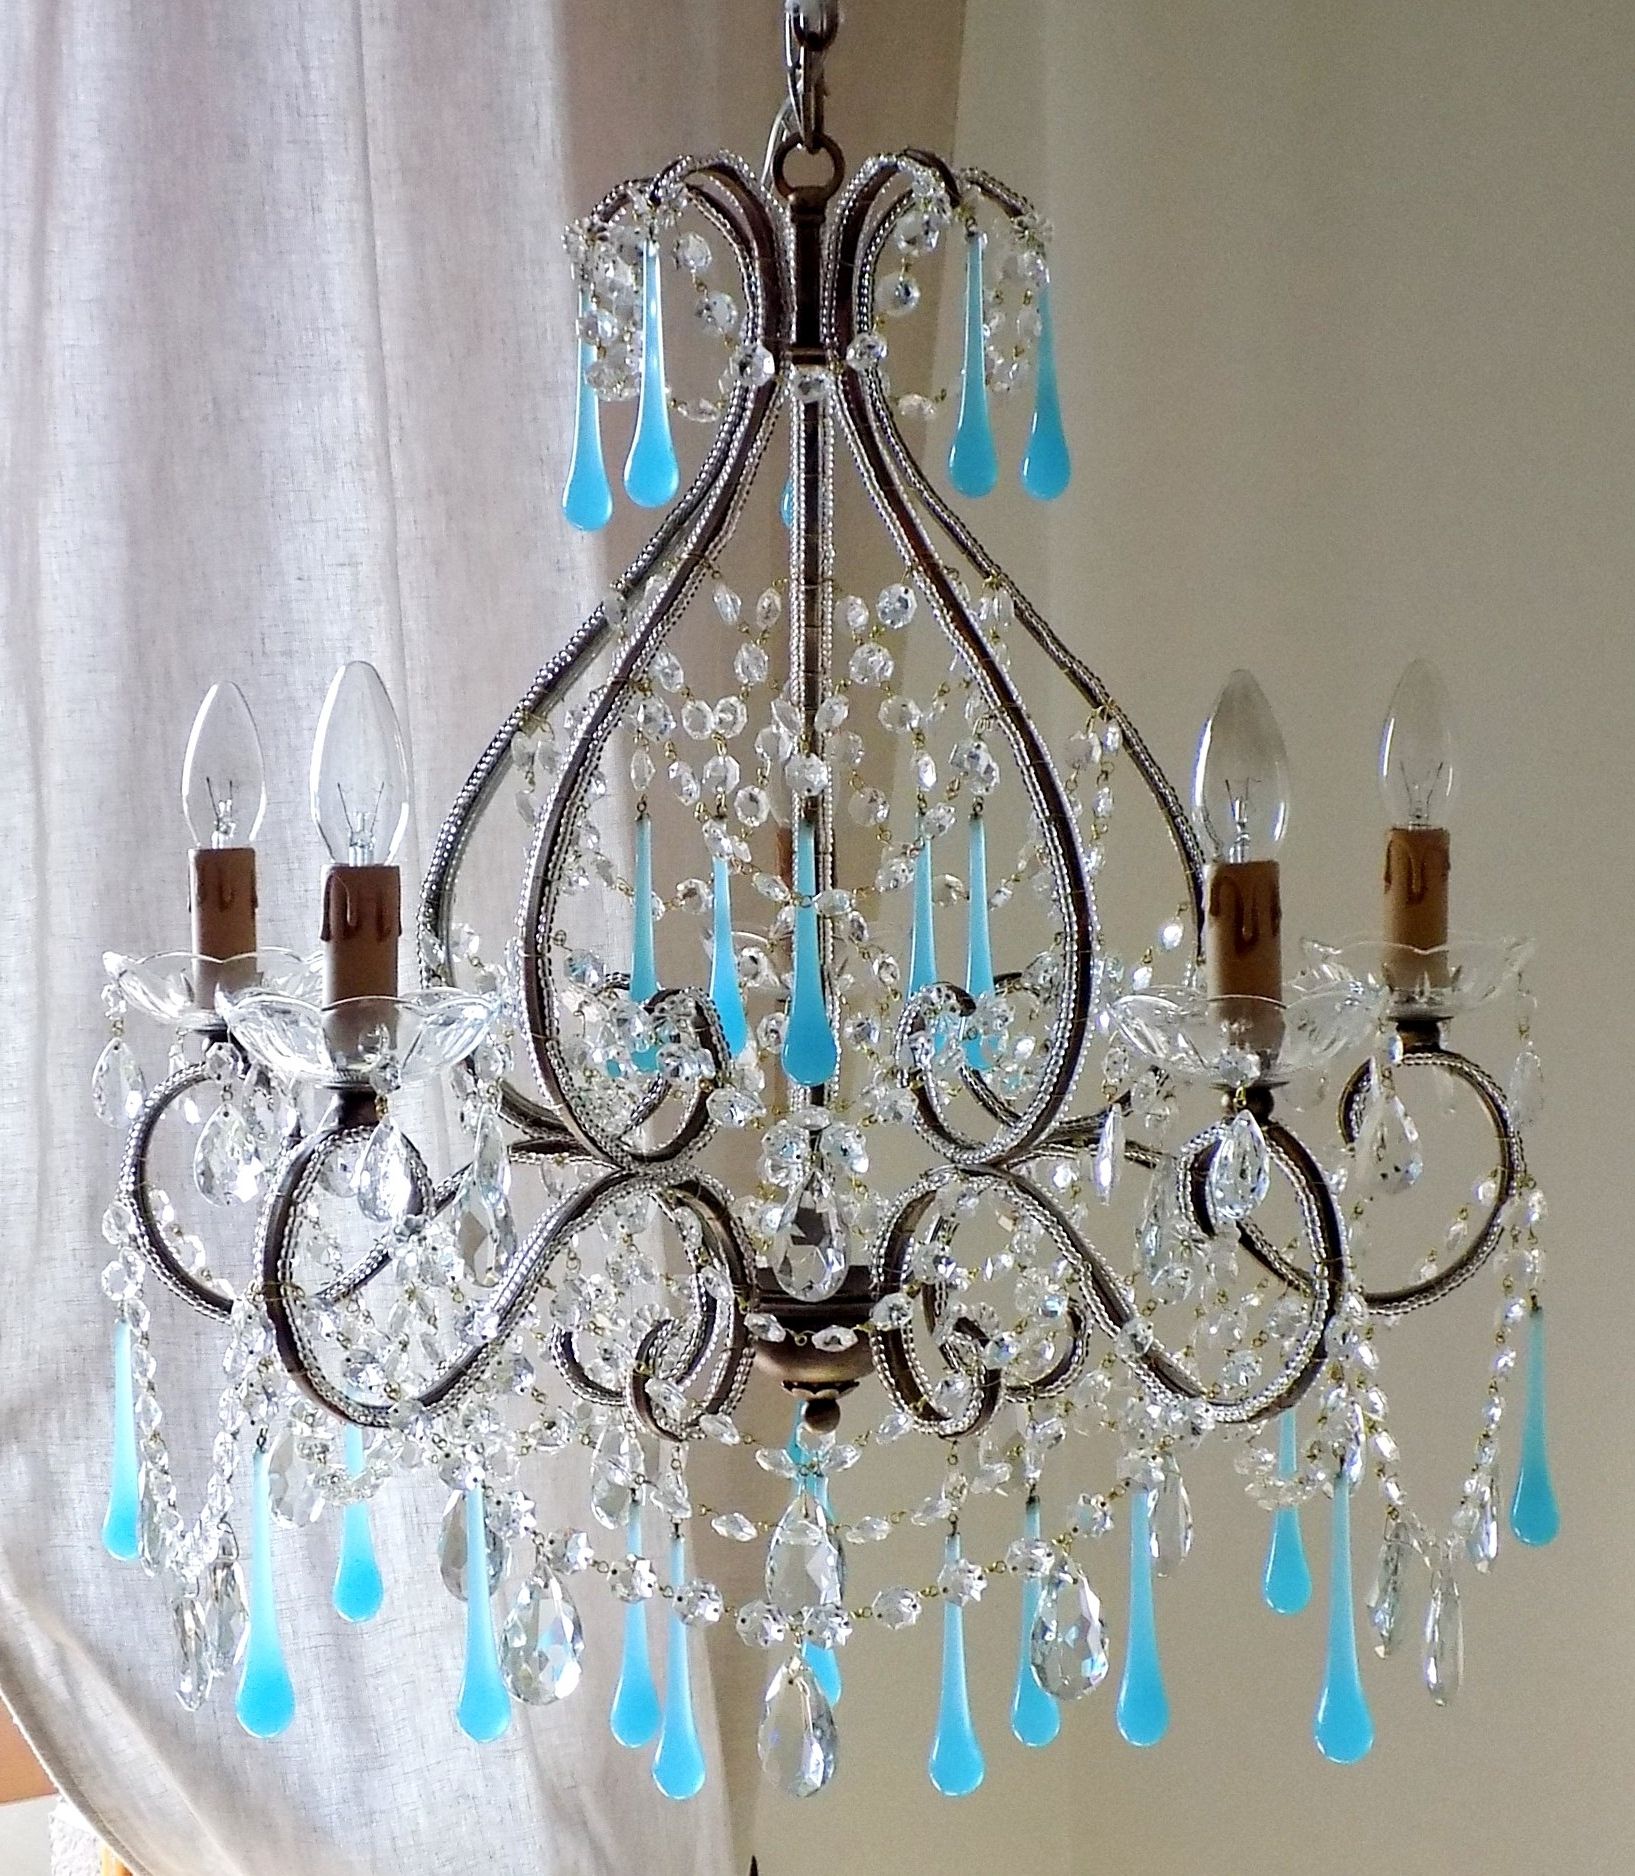 Well Known Italian Vintage 9 Arms Chandelier With Rare Shaped Crystals Intended For Turquoise Birdcage Chandeliers (View 1 of 20)